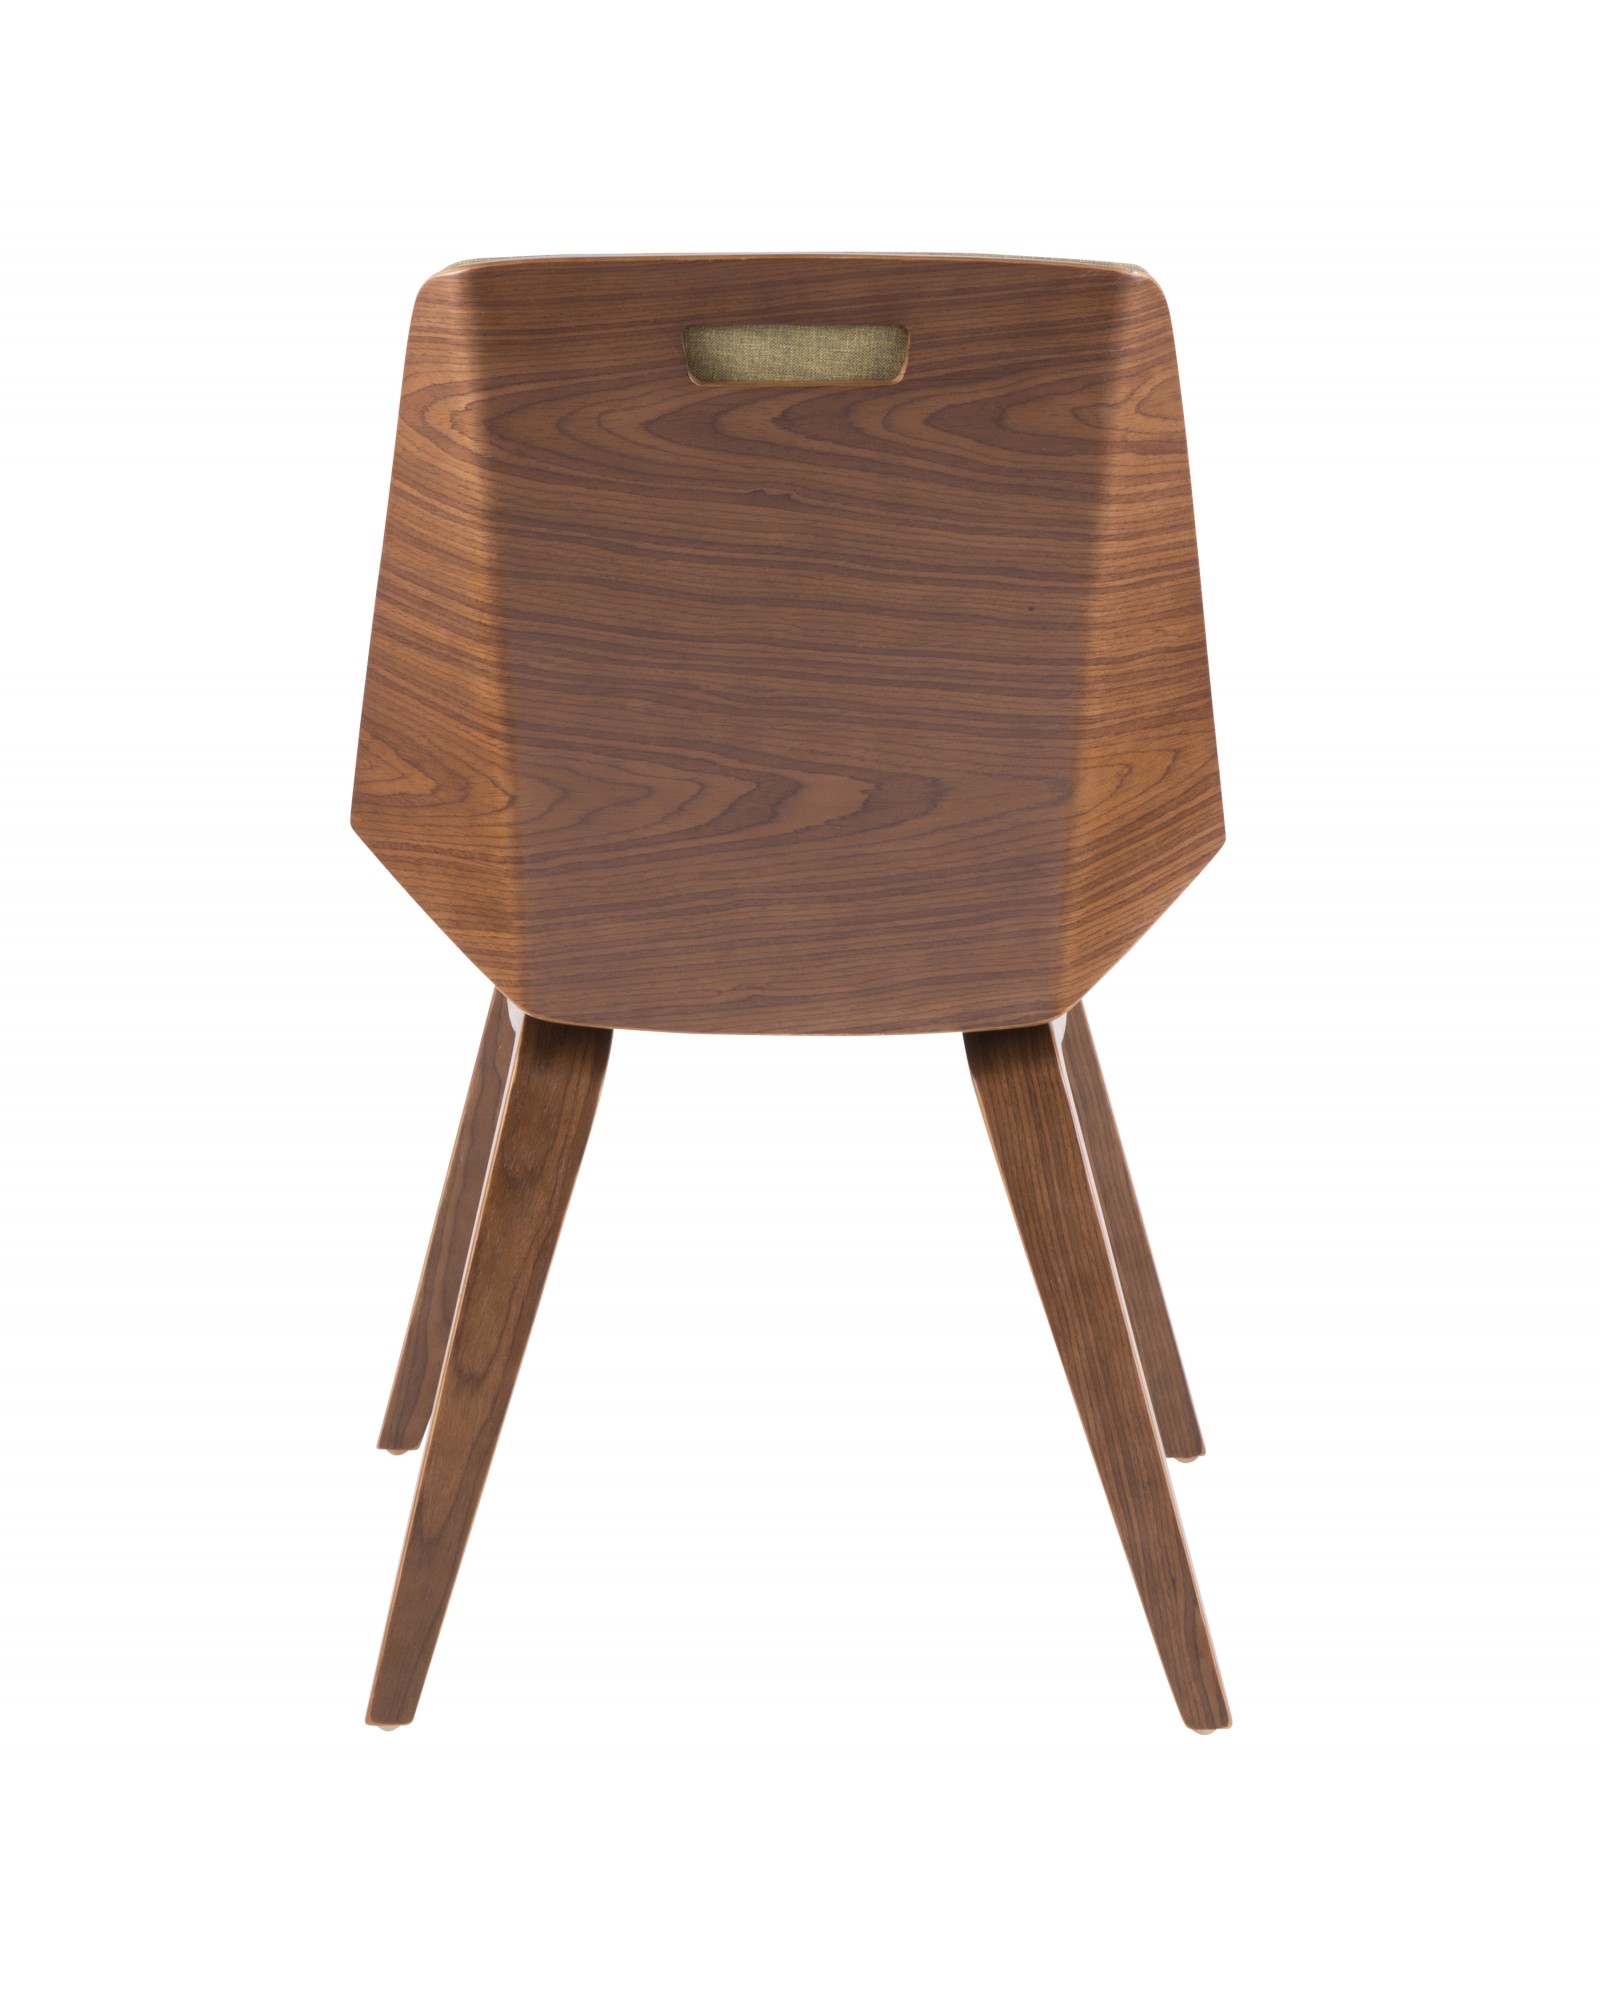 Corazza Mid-century Modern Dining/Accent Chair in Walnut and Green